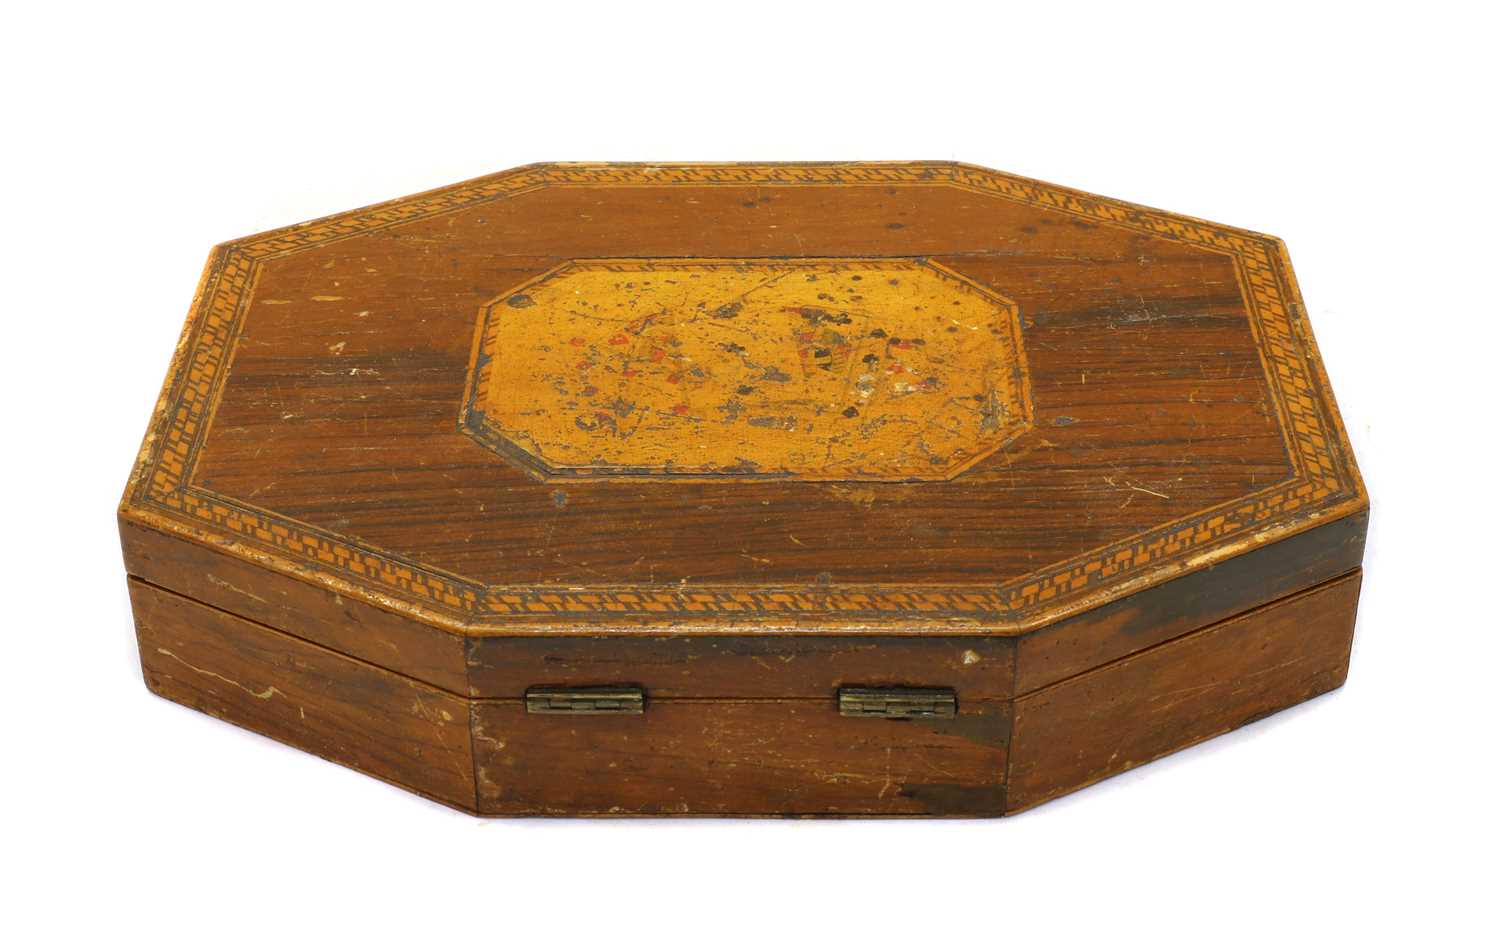 A 19th century wooden games box with mother of pearl gaming counters - Image 4 of 4